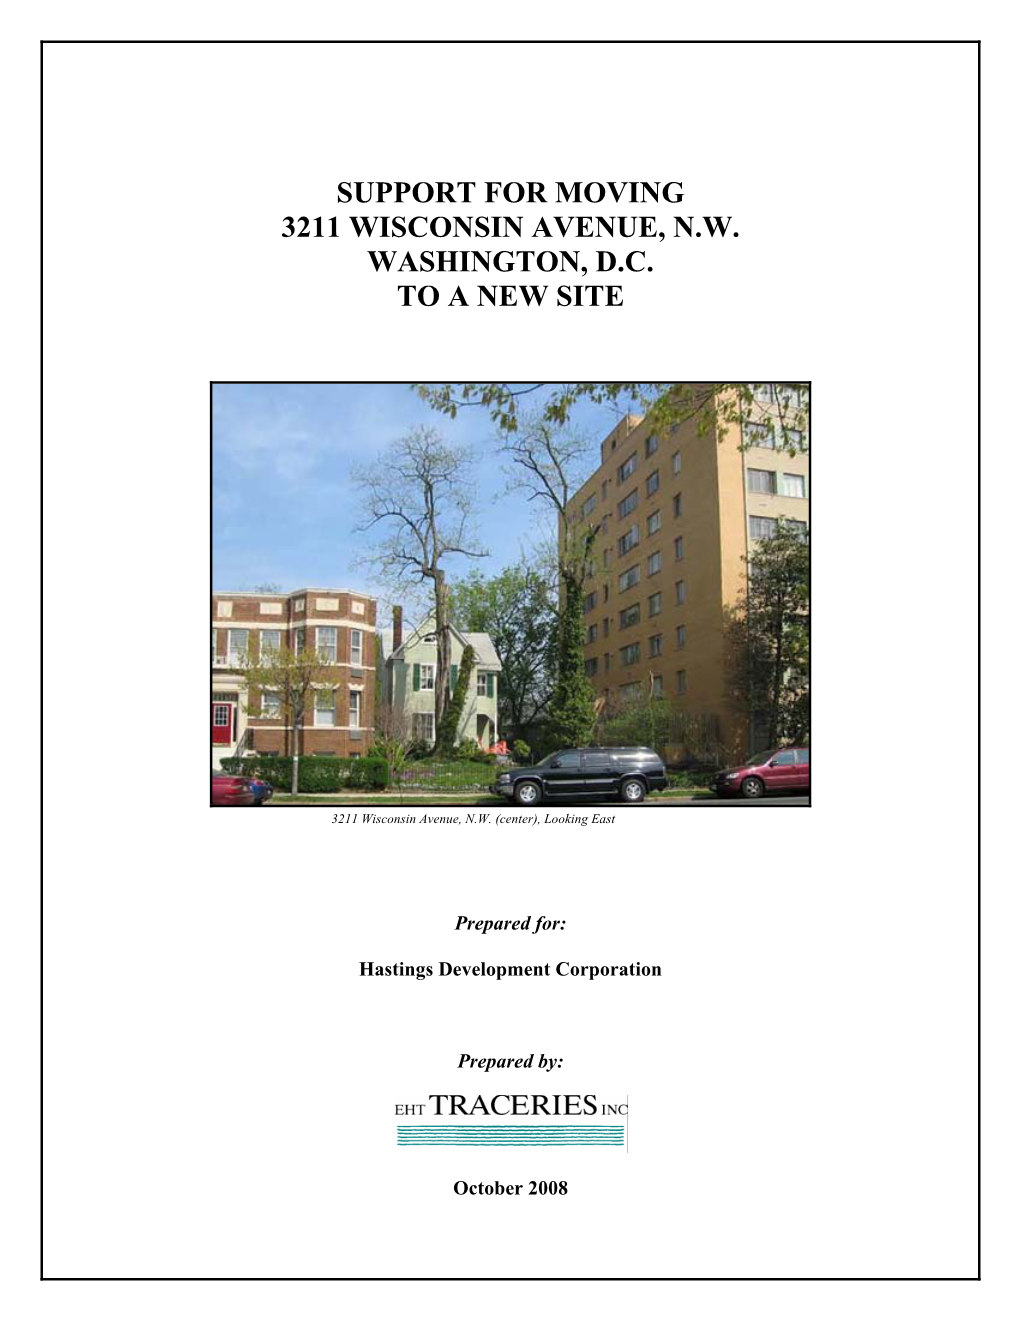 Support for Moving 3211 Wisconsin Avenue, N.W. Washington, D.C. to a New Site